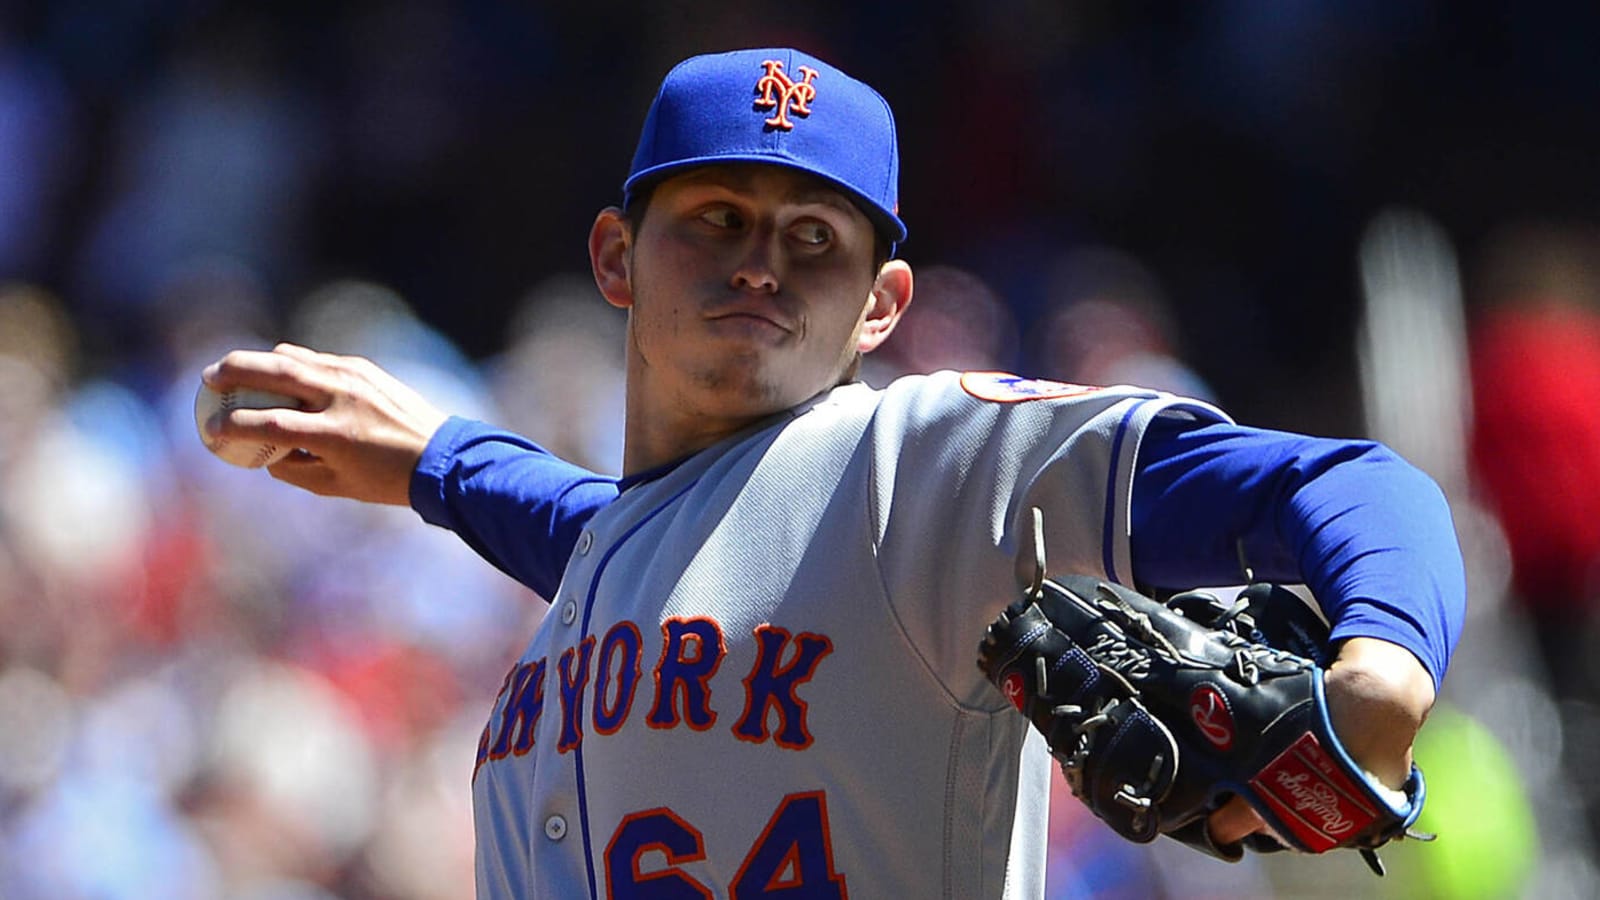 White Sox sign former Mets righty to one-year deal